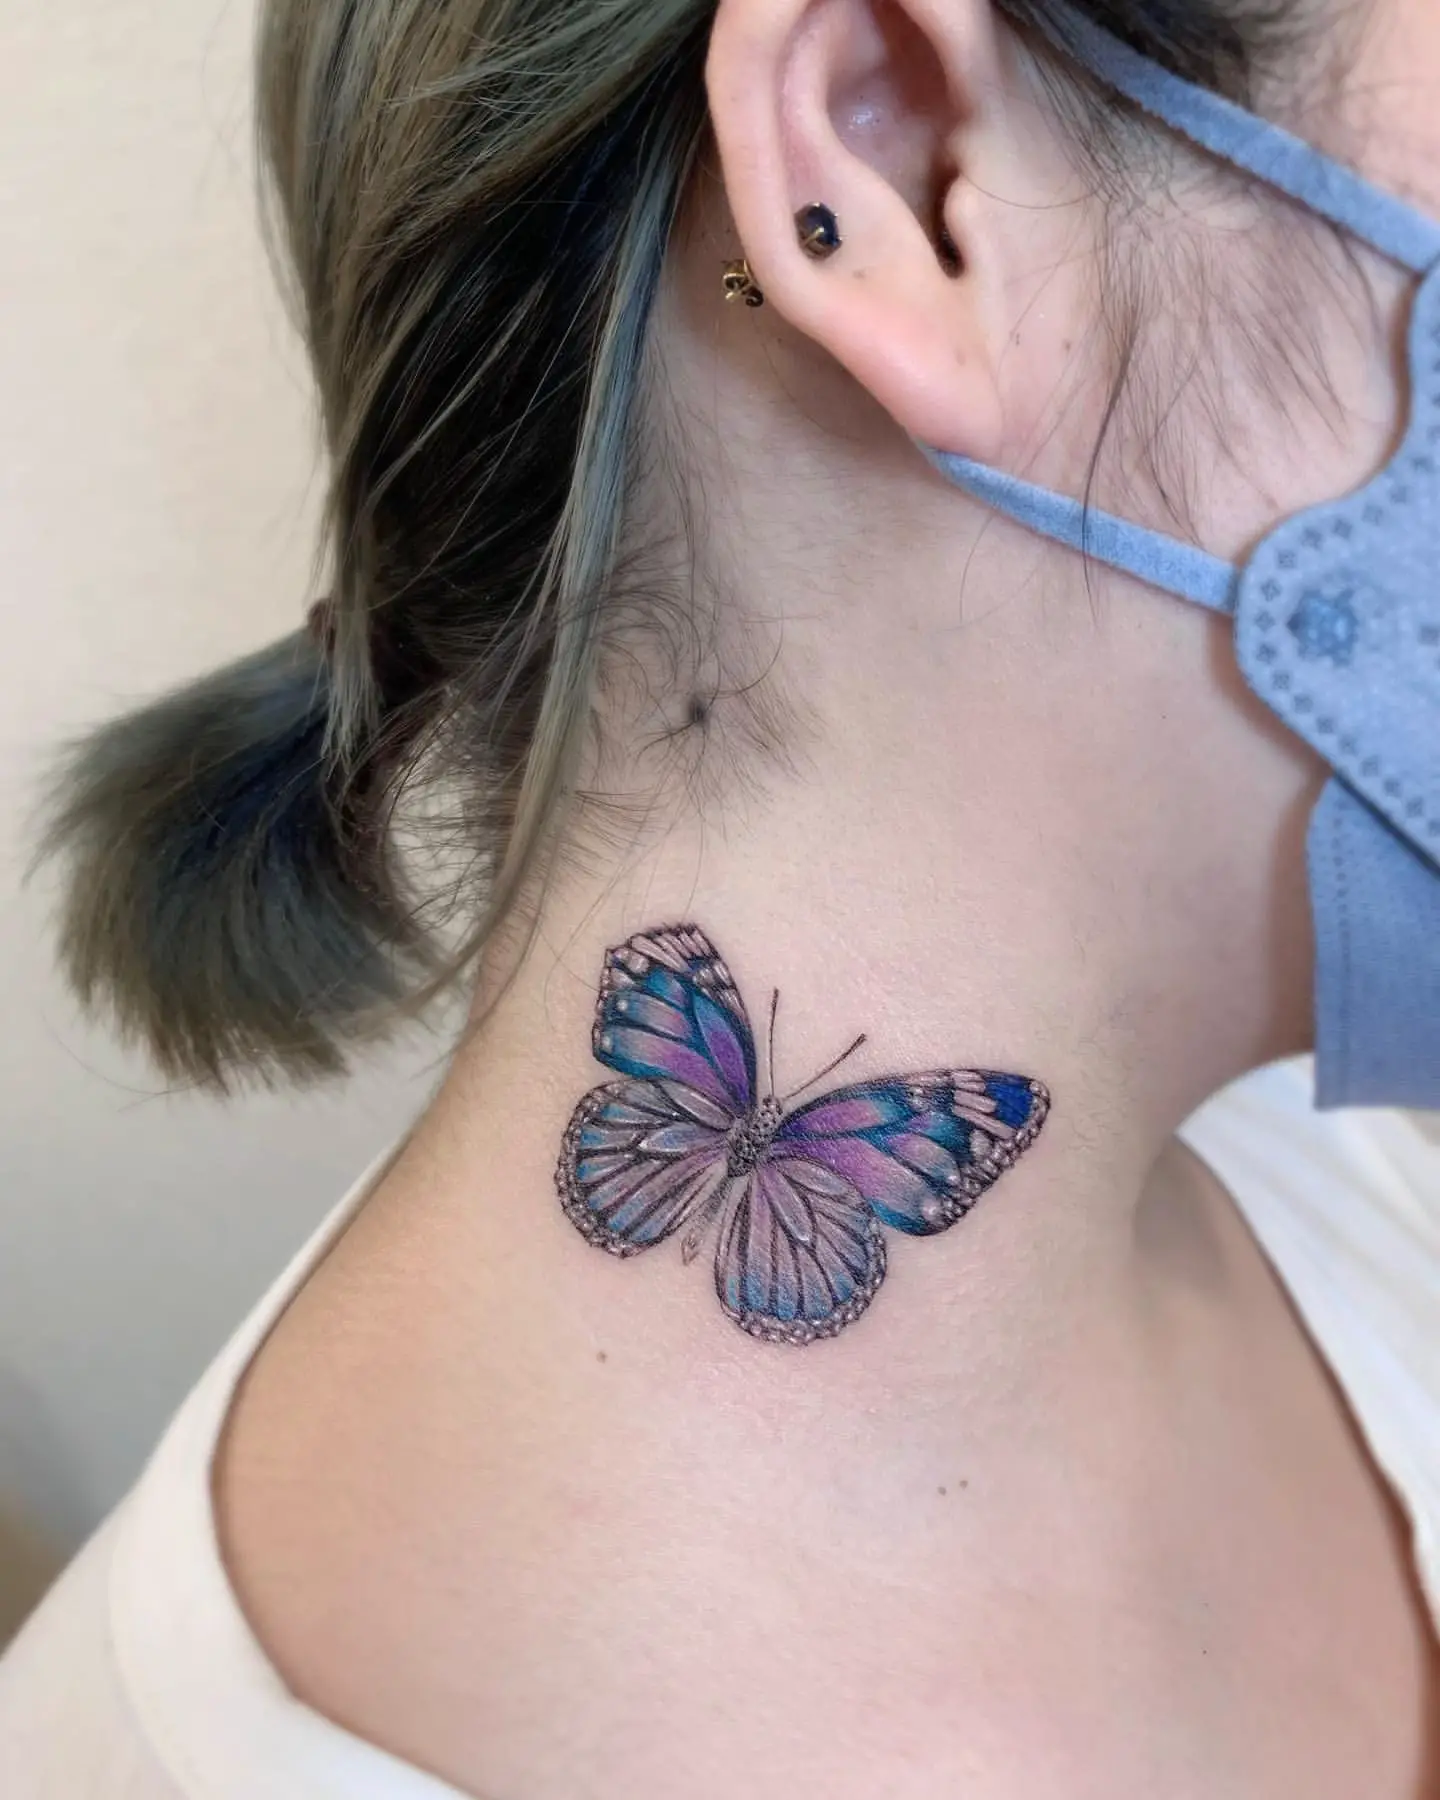 Realistic Watercolor Butterfly Tattoo on Woman’s Neck